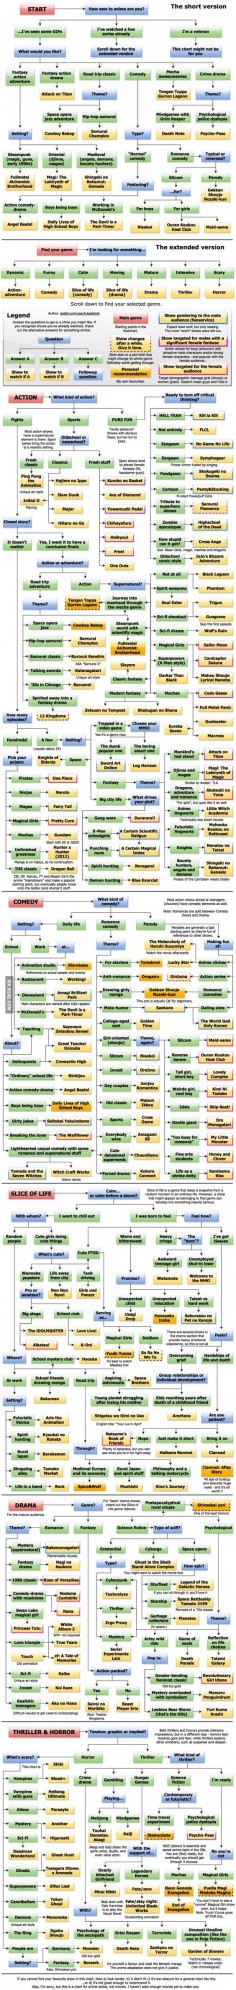 Anime: What to watch flowchart